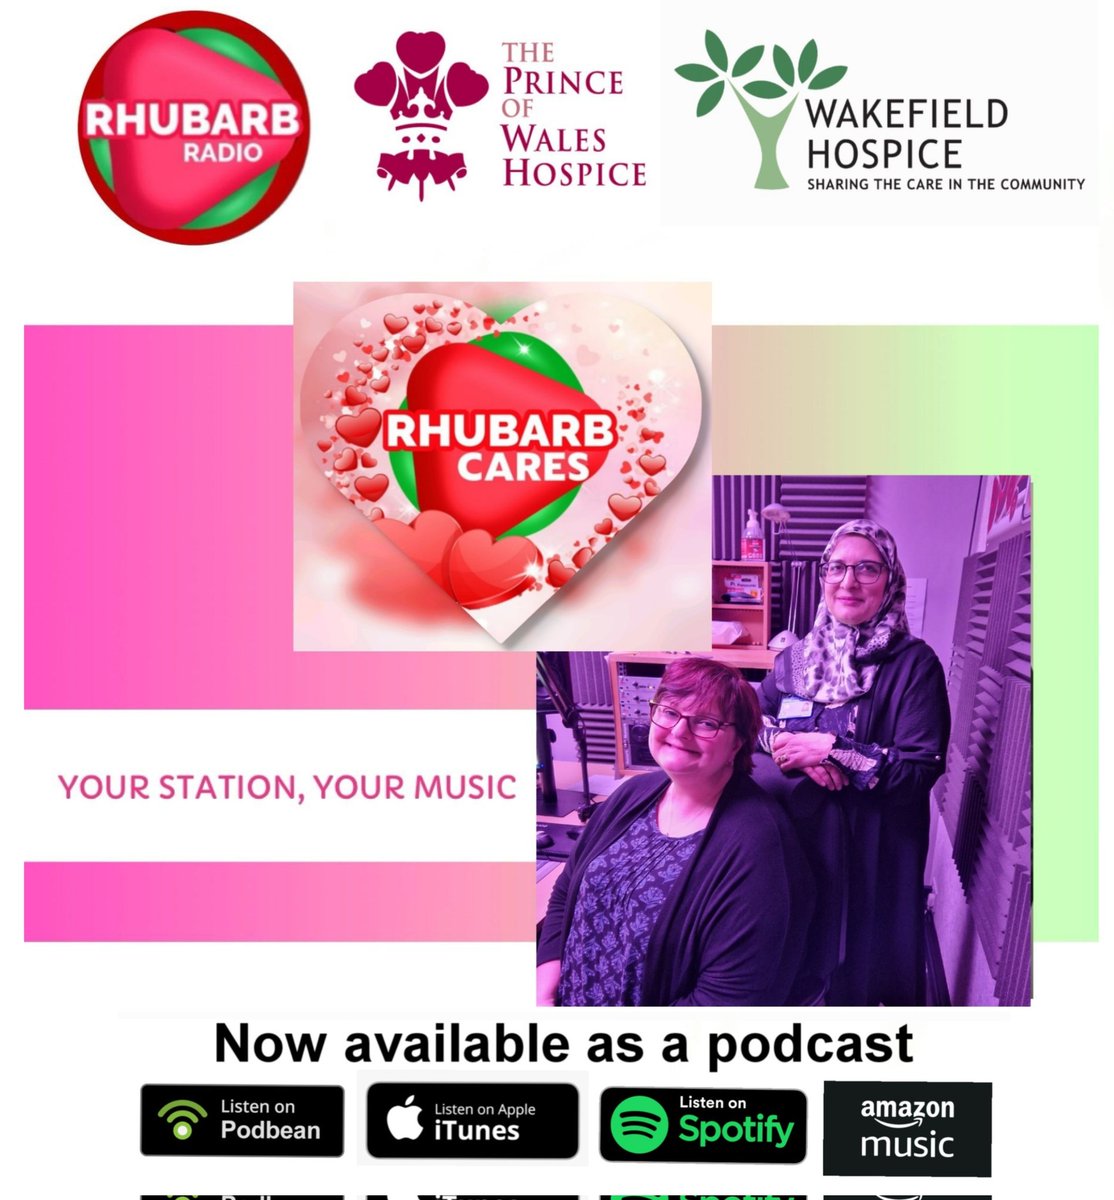 🎙Listen to the Rhubarb Cares feature with Dave Adams introducing Farzana Aziz from Wakefield Hospice, and Jo Dunford from The Prince of Wales Hospice, talking about the incredible work they do supporting the community, on The Rhubarb Radio Podcast 🙏🏼 @WfldHospice @pwhospice